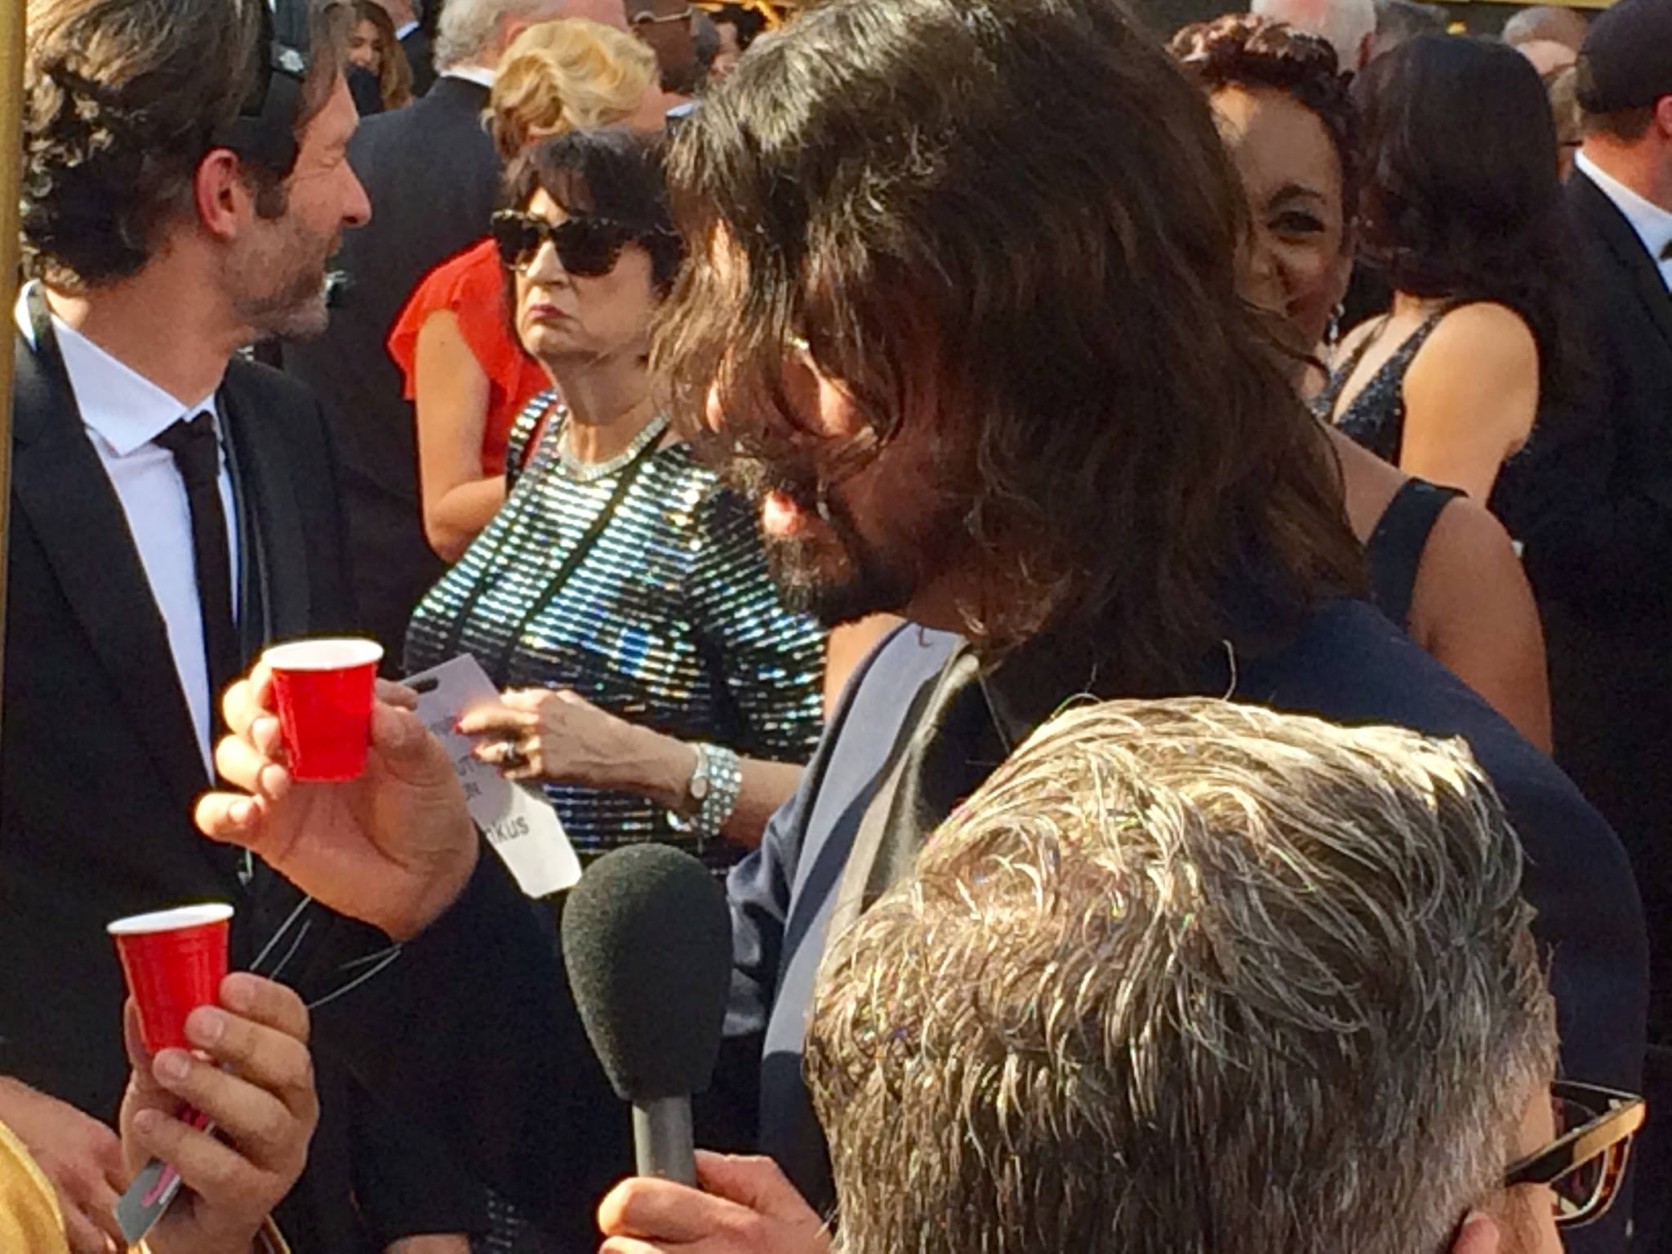 D.C.-area native Dave Grohl does shots on the red carpet. (WTOP/Jason Fraley)